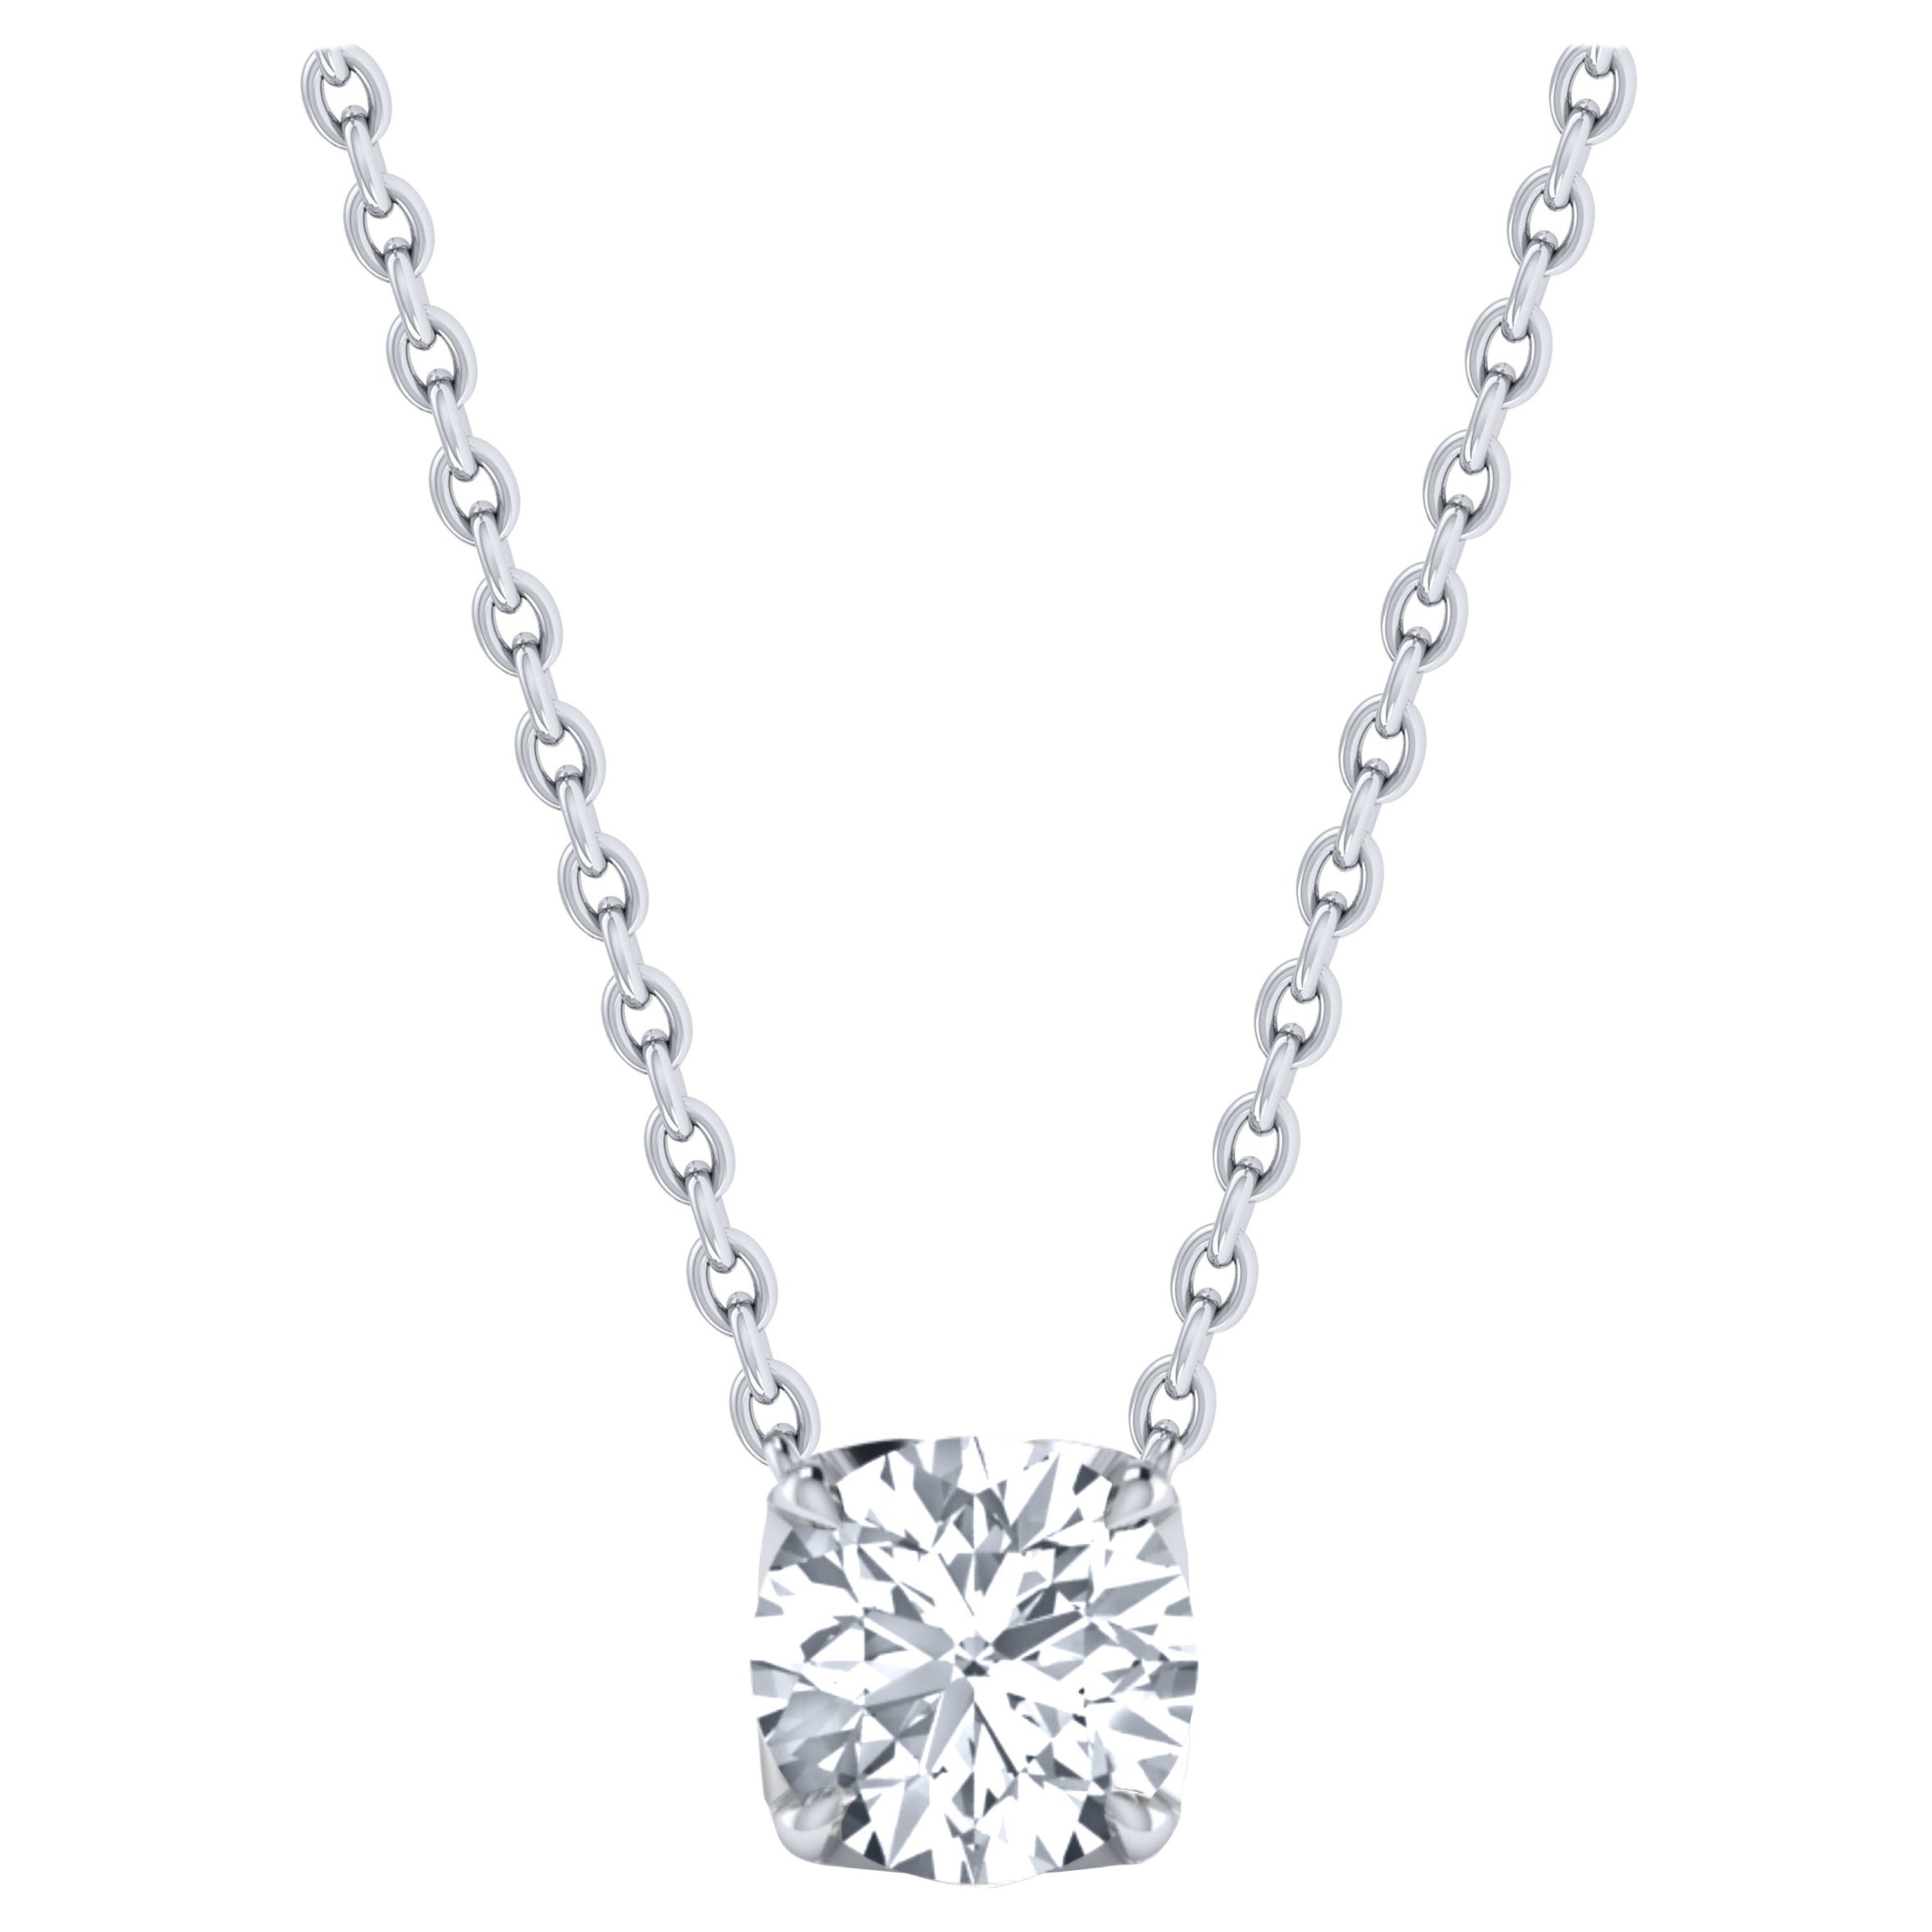 Harakh GIA Certified 0.27 Carat Solitaire Diamond Pendant Necklace in 18 KT Gold For Sale